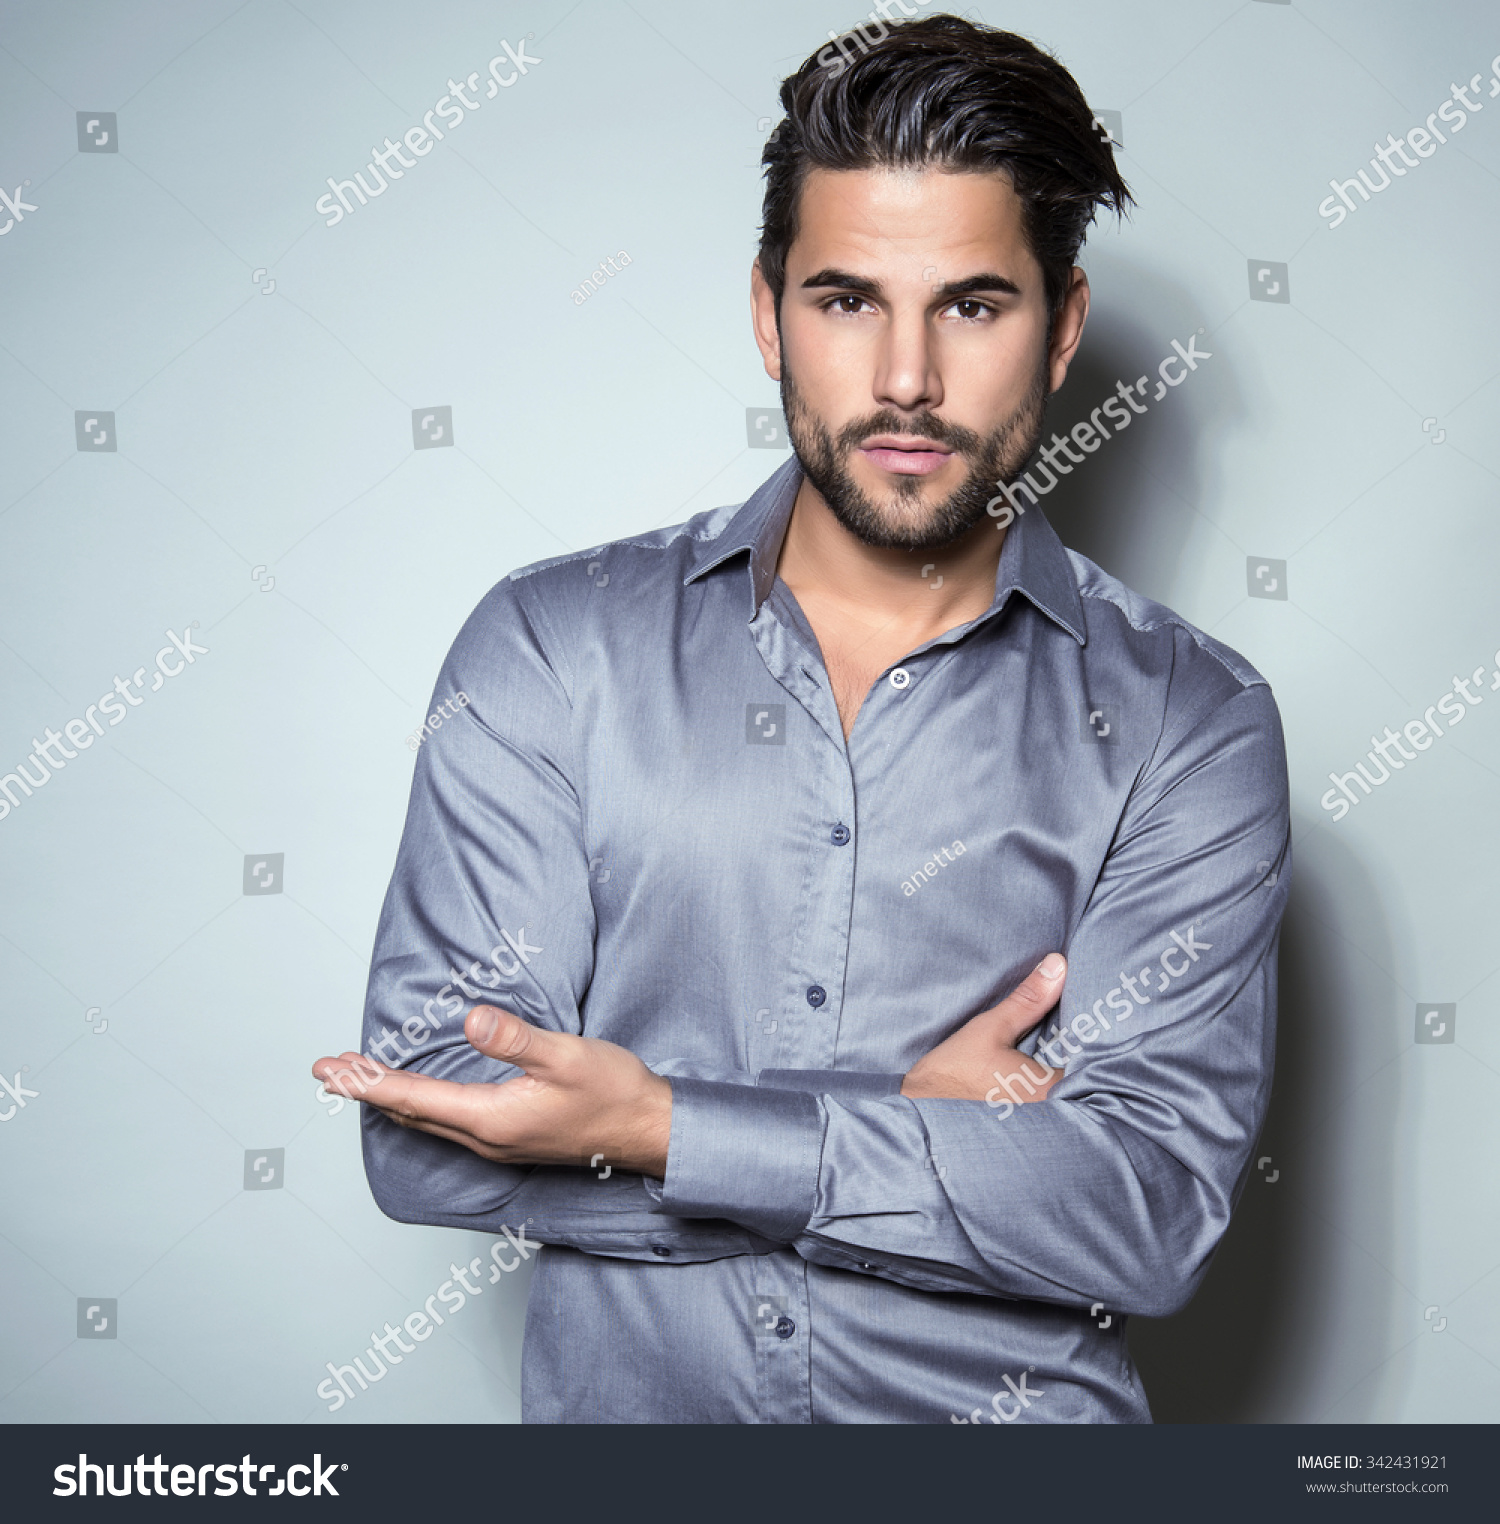 Handsome Young Man Posing Office Wear Stock Photo 342431921 ...